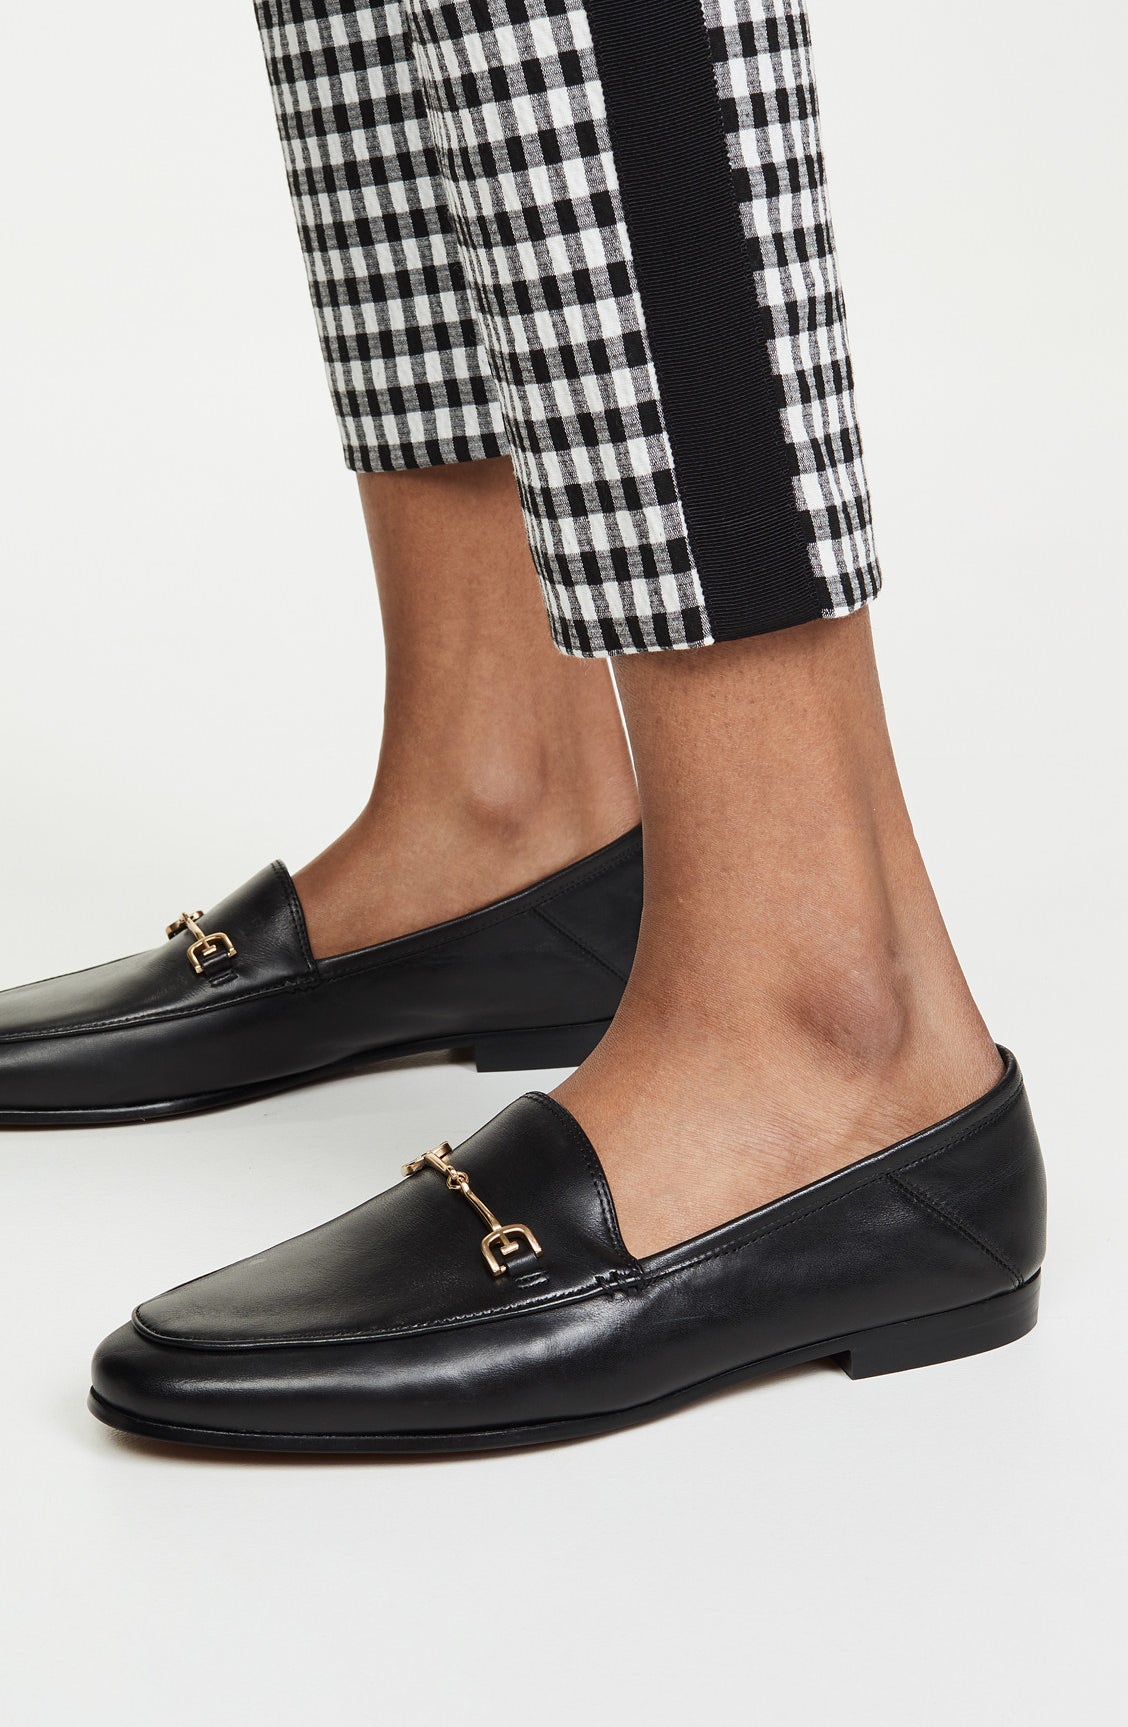 The loafers in black with a small gold metal bar across the top